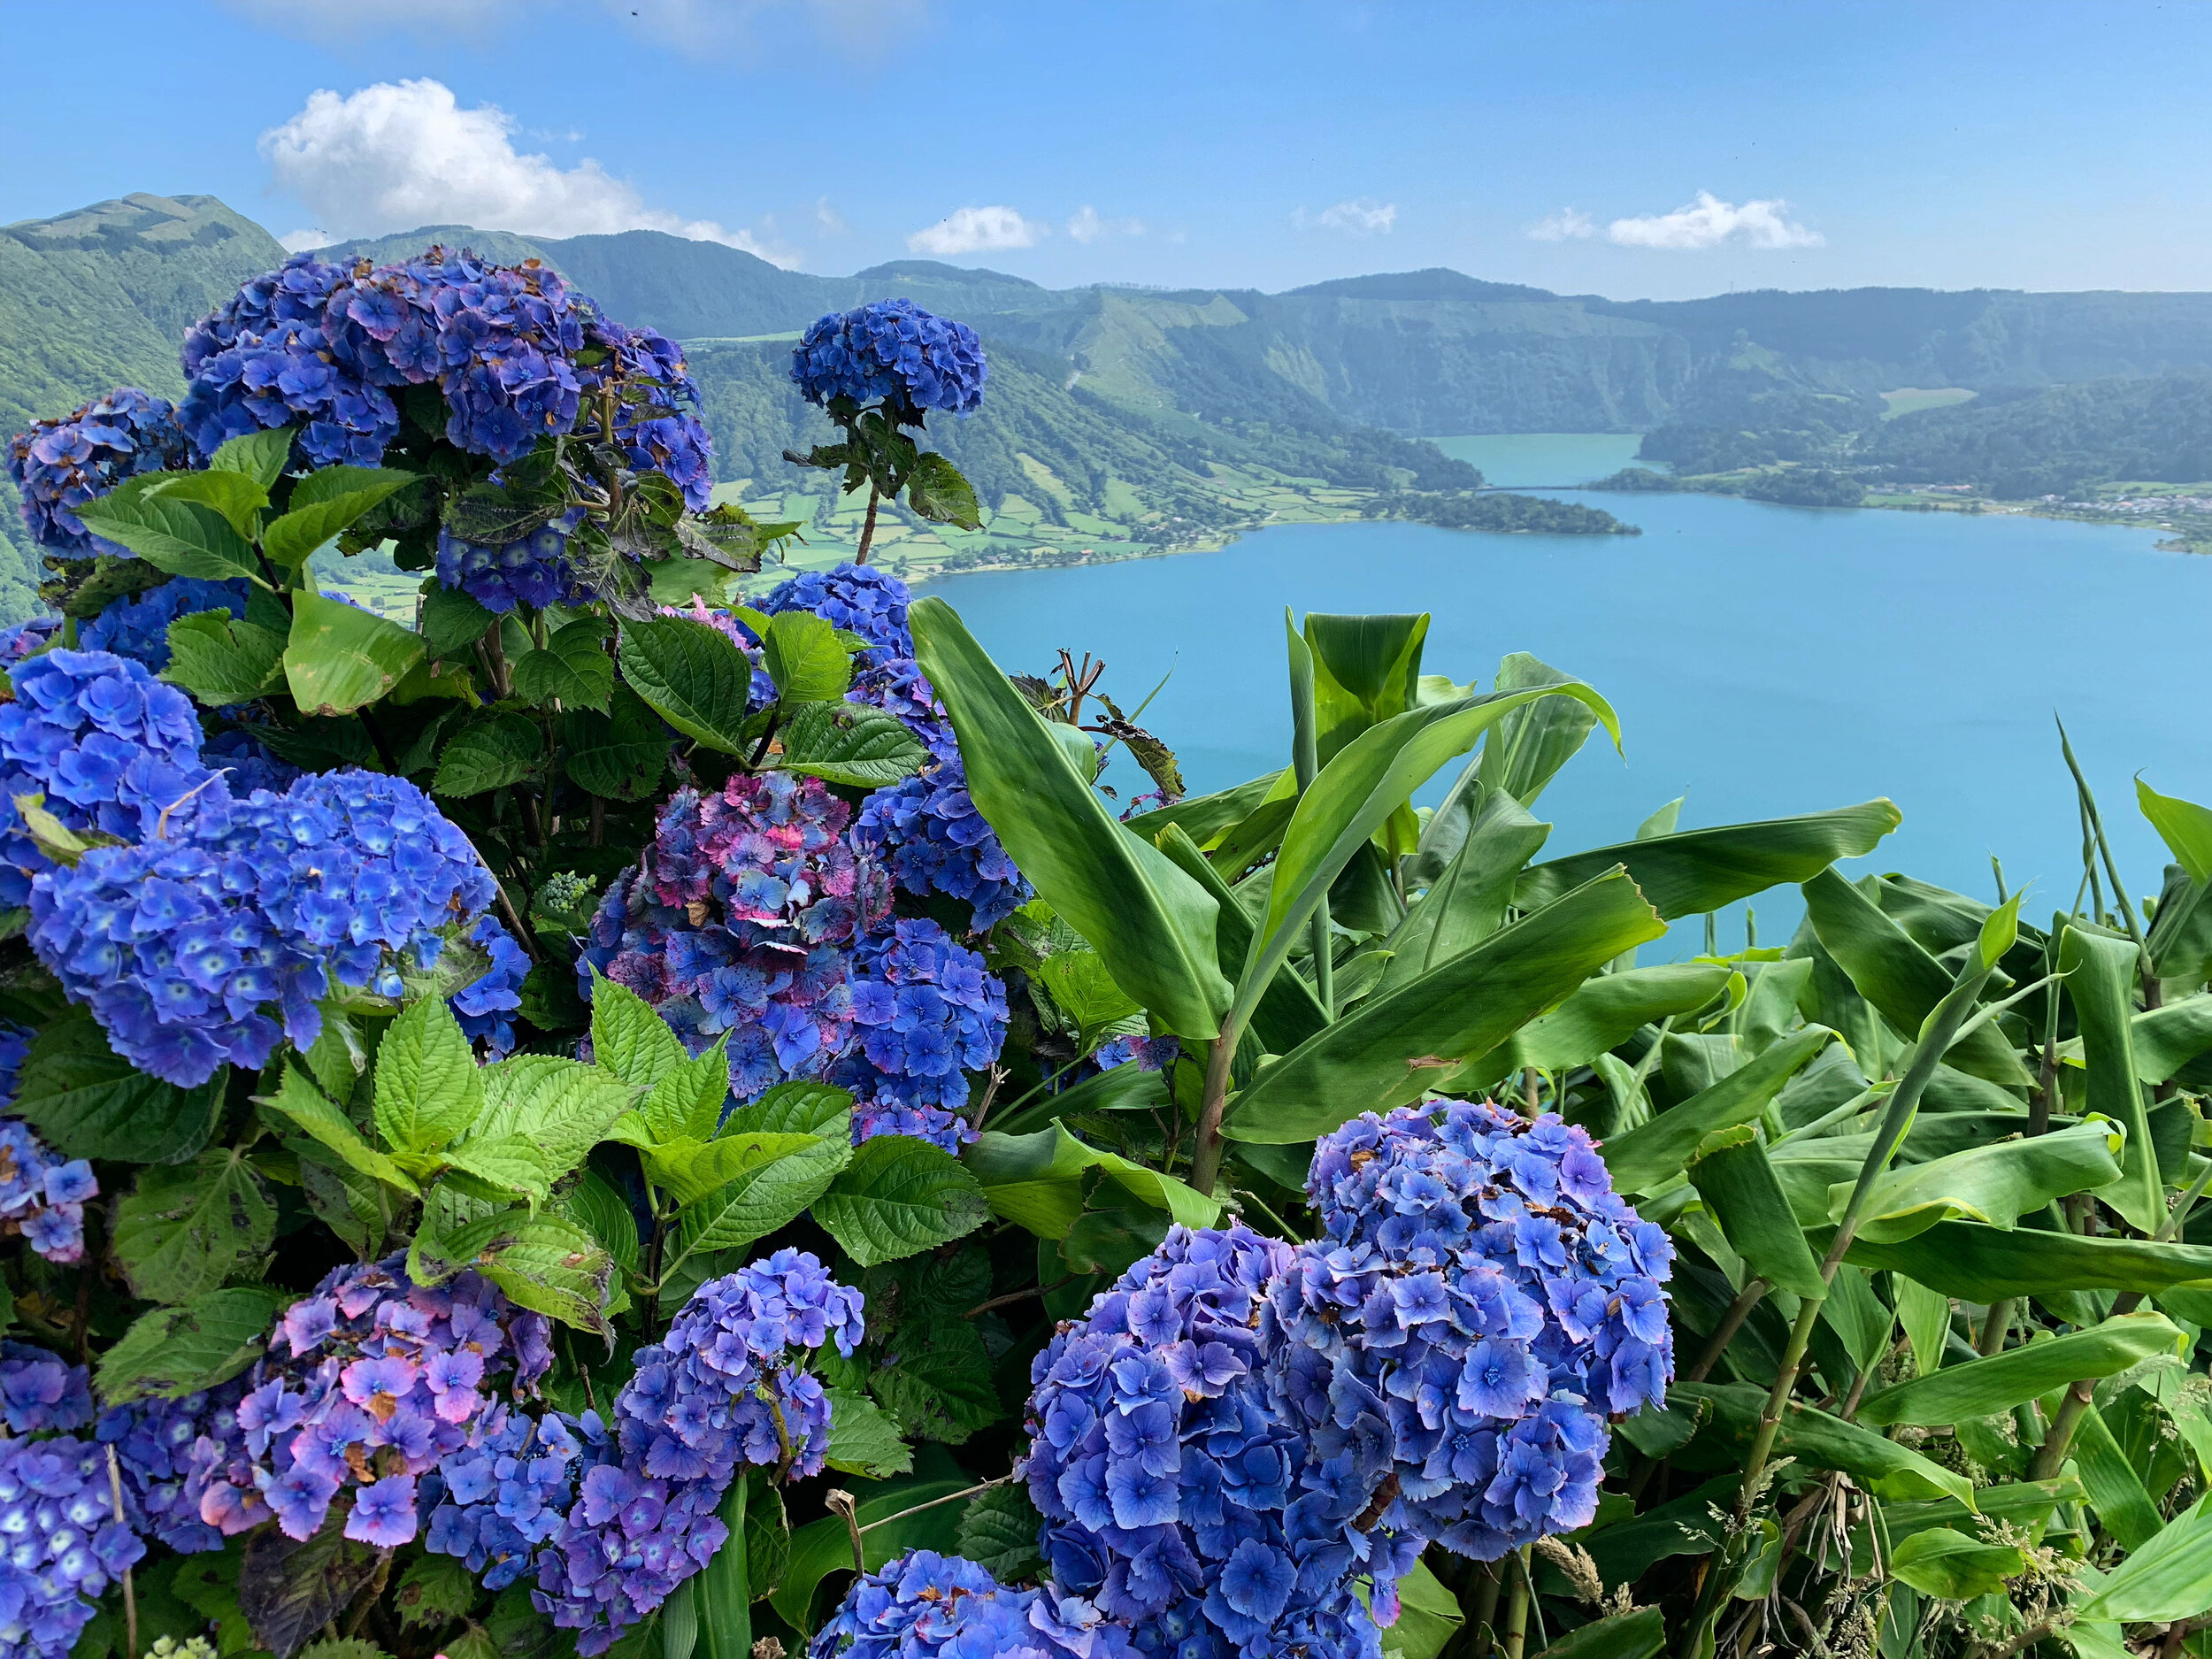 THE AZORES